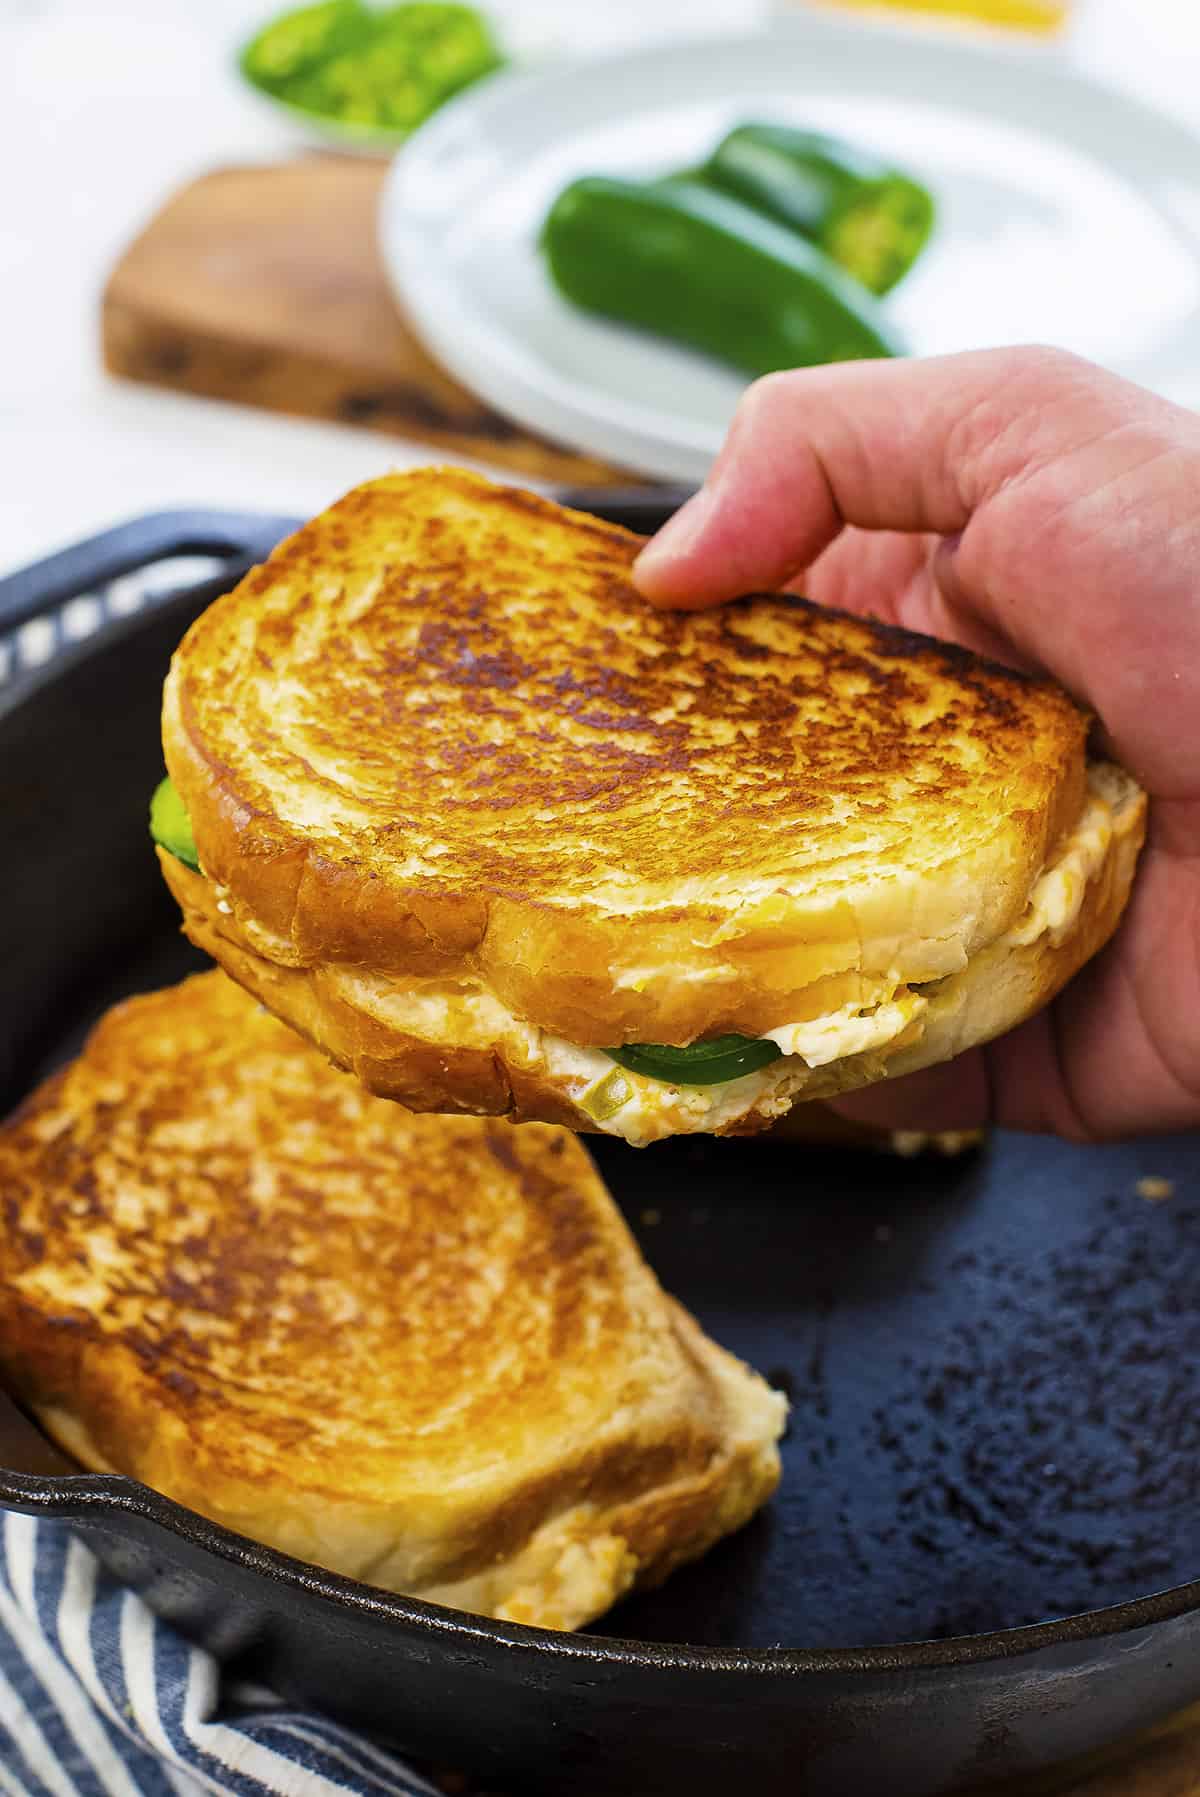 Hand holding a grilled cheese sandwich.